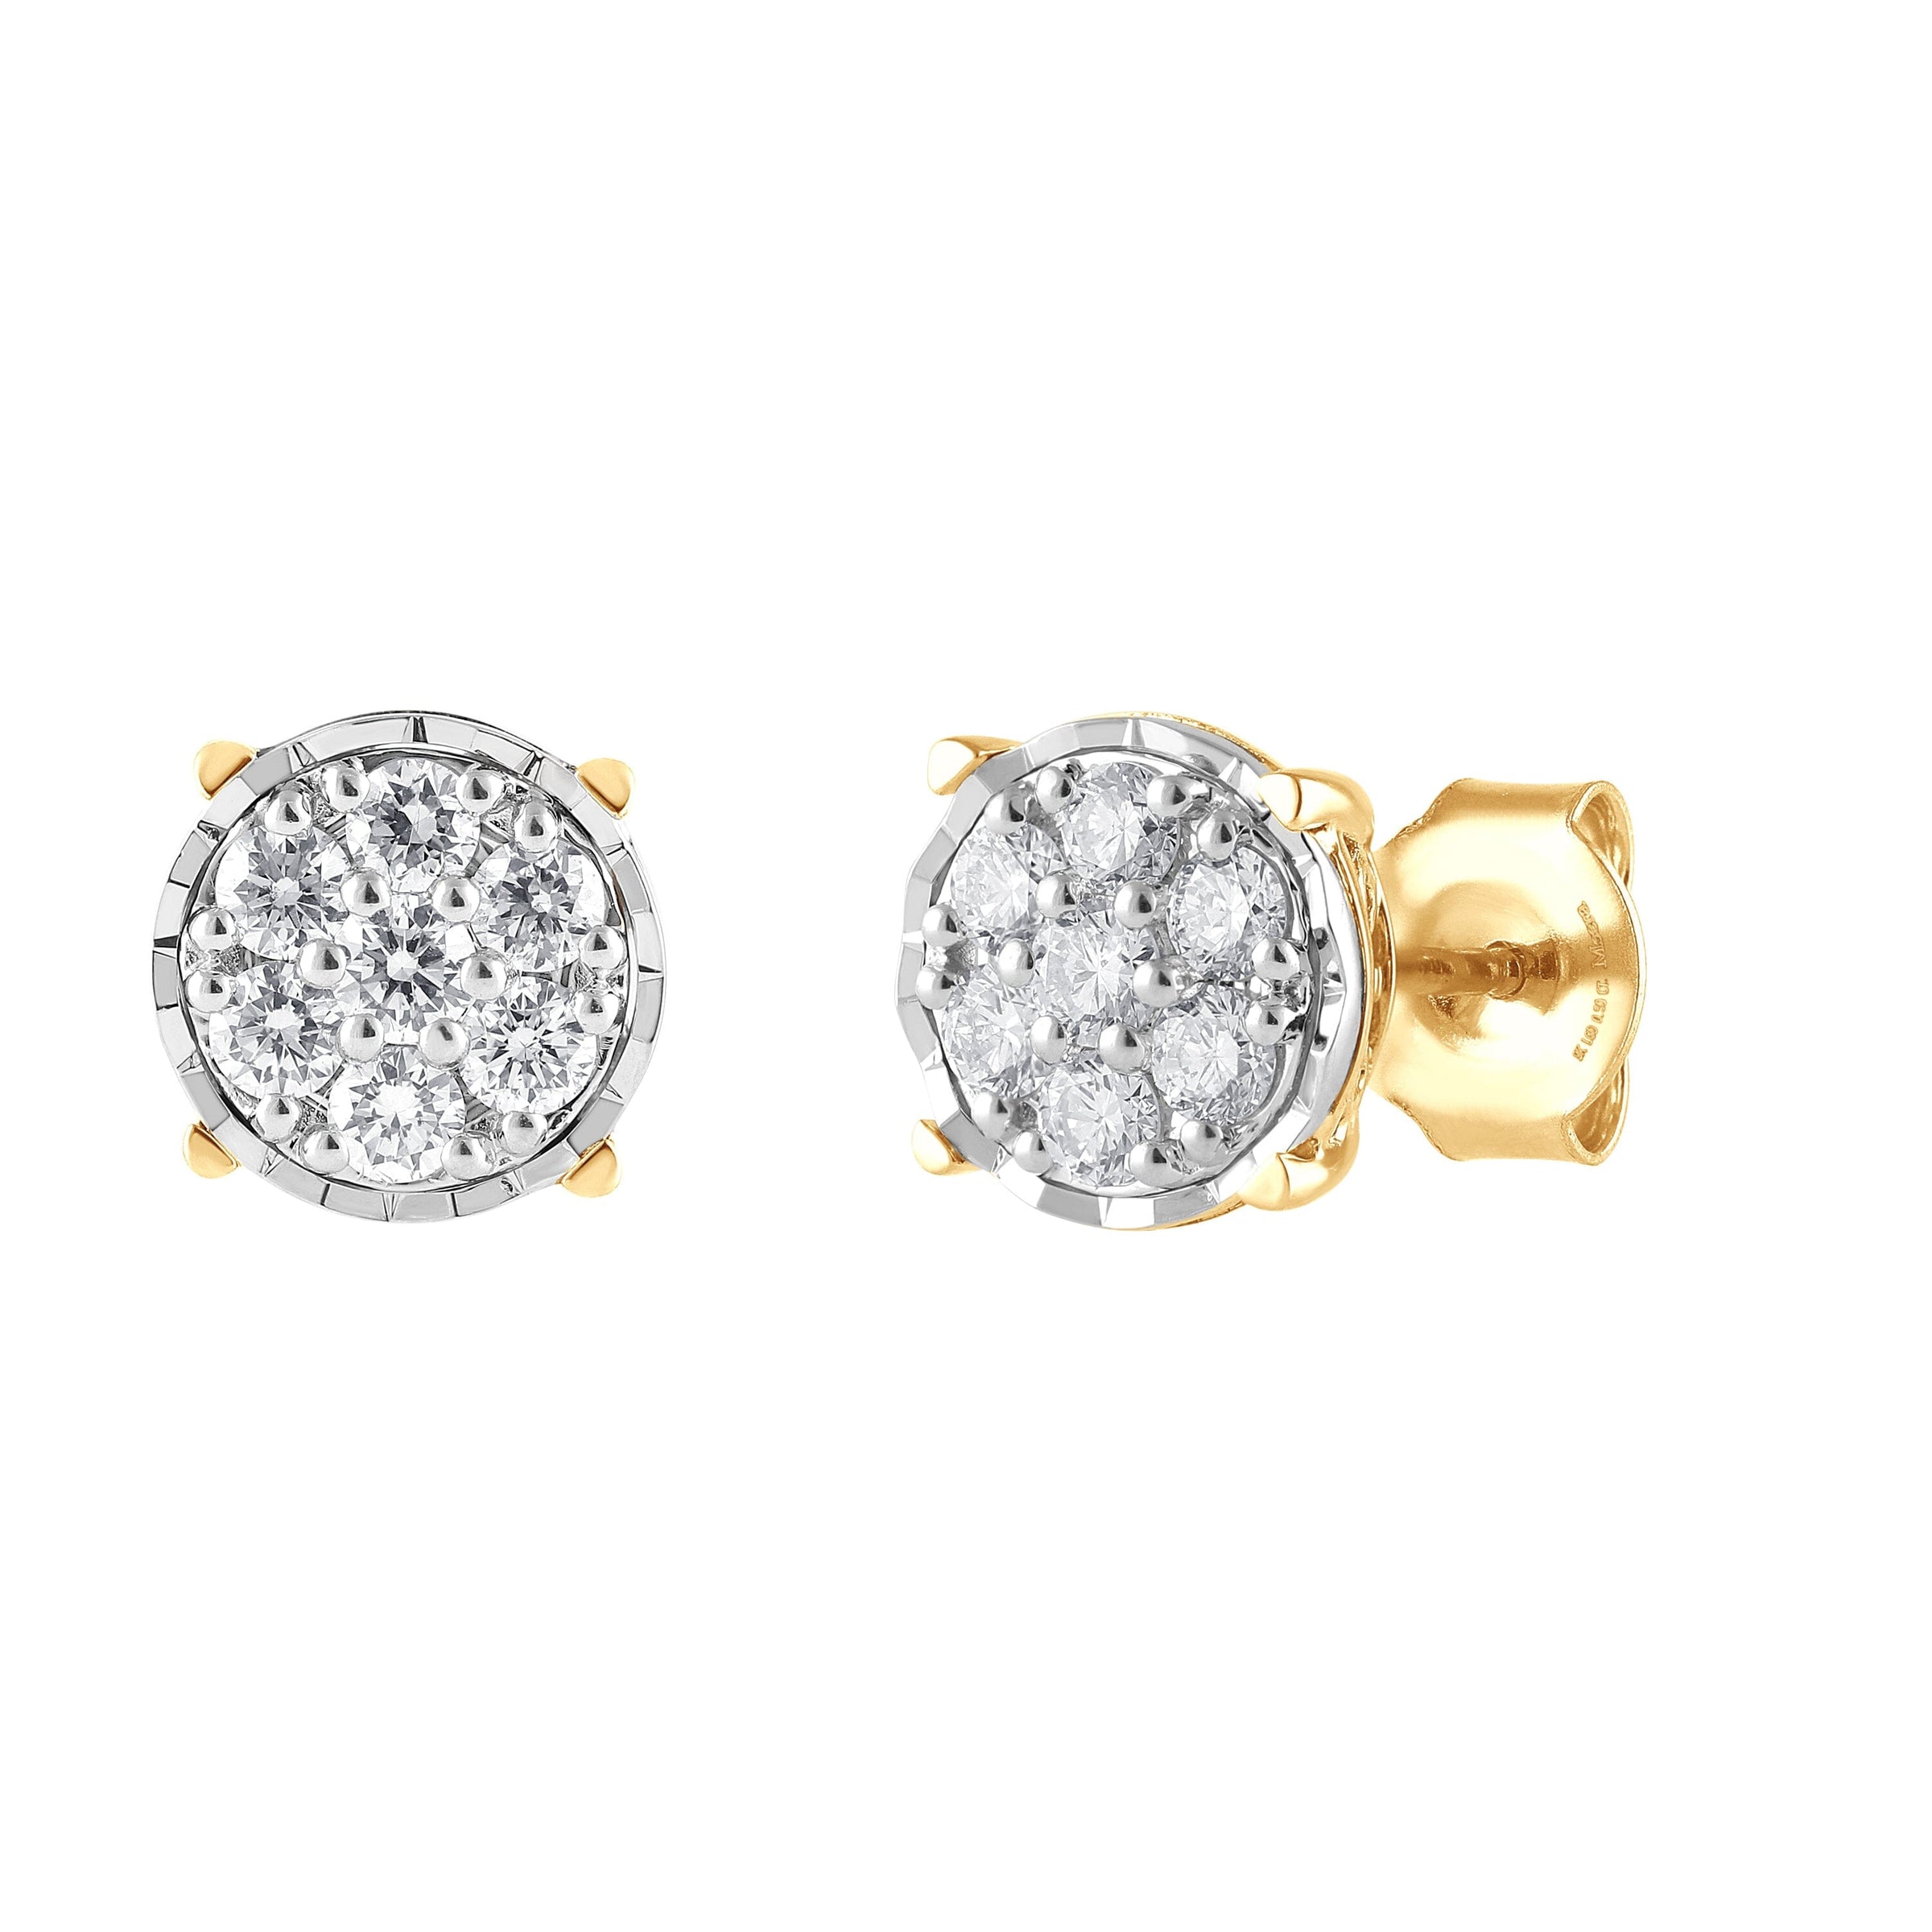 Meera Flower Composite Earrings with 1/2ct of Laboratory Grown Diamonds in 9ct Yellow Gold Earrings Bevilles 